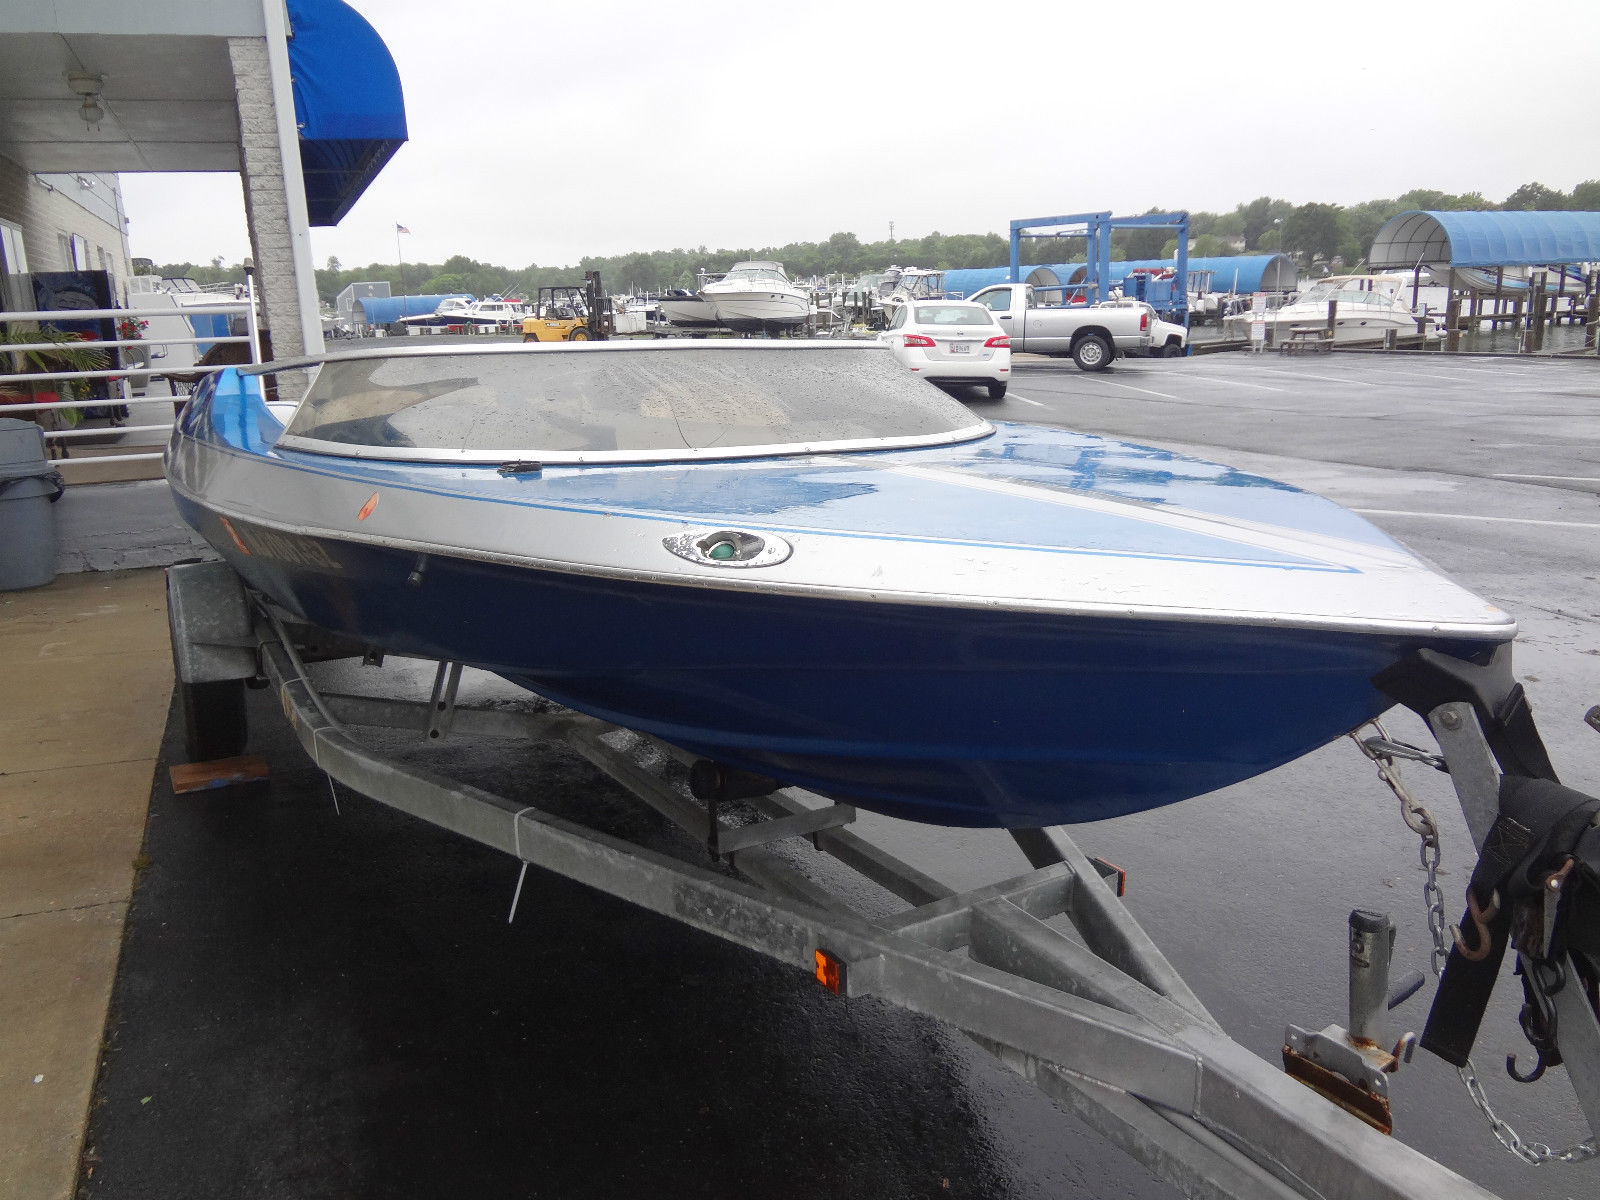 Sidewinder Sidewinder 1971 For Sale For $100 - Boats-From-Usa.com